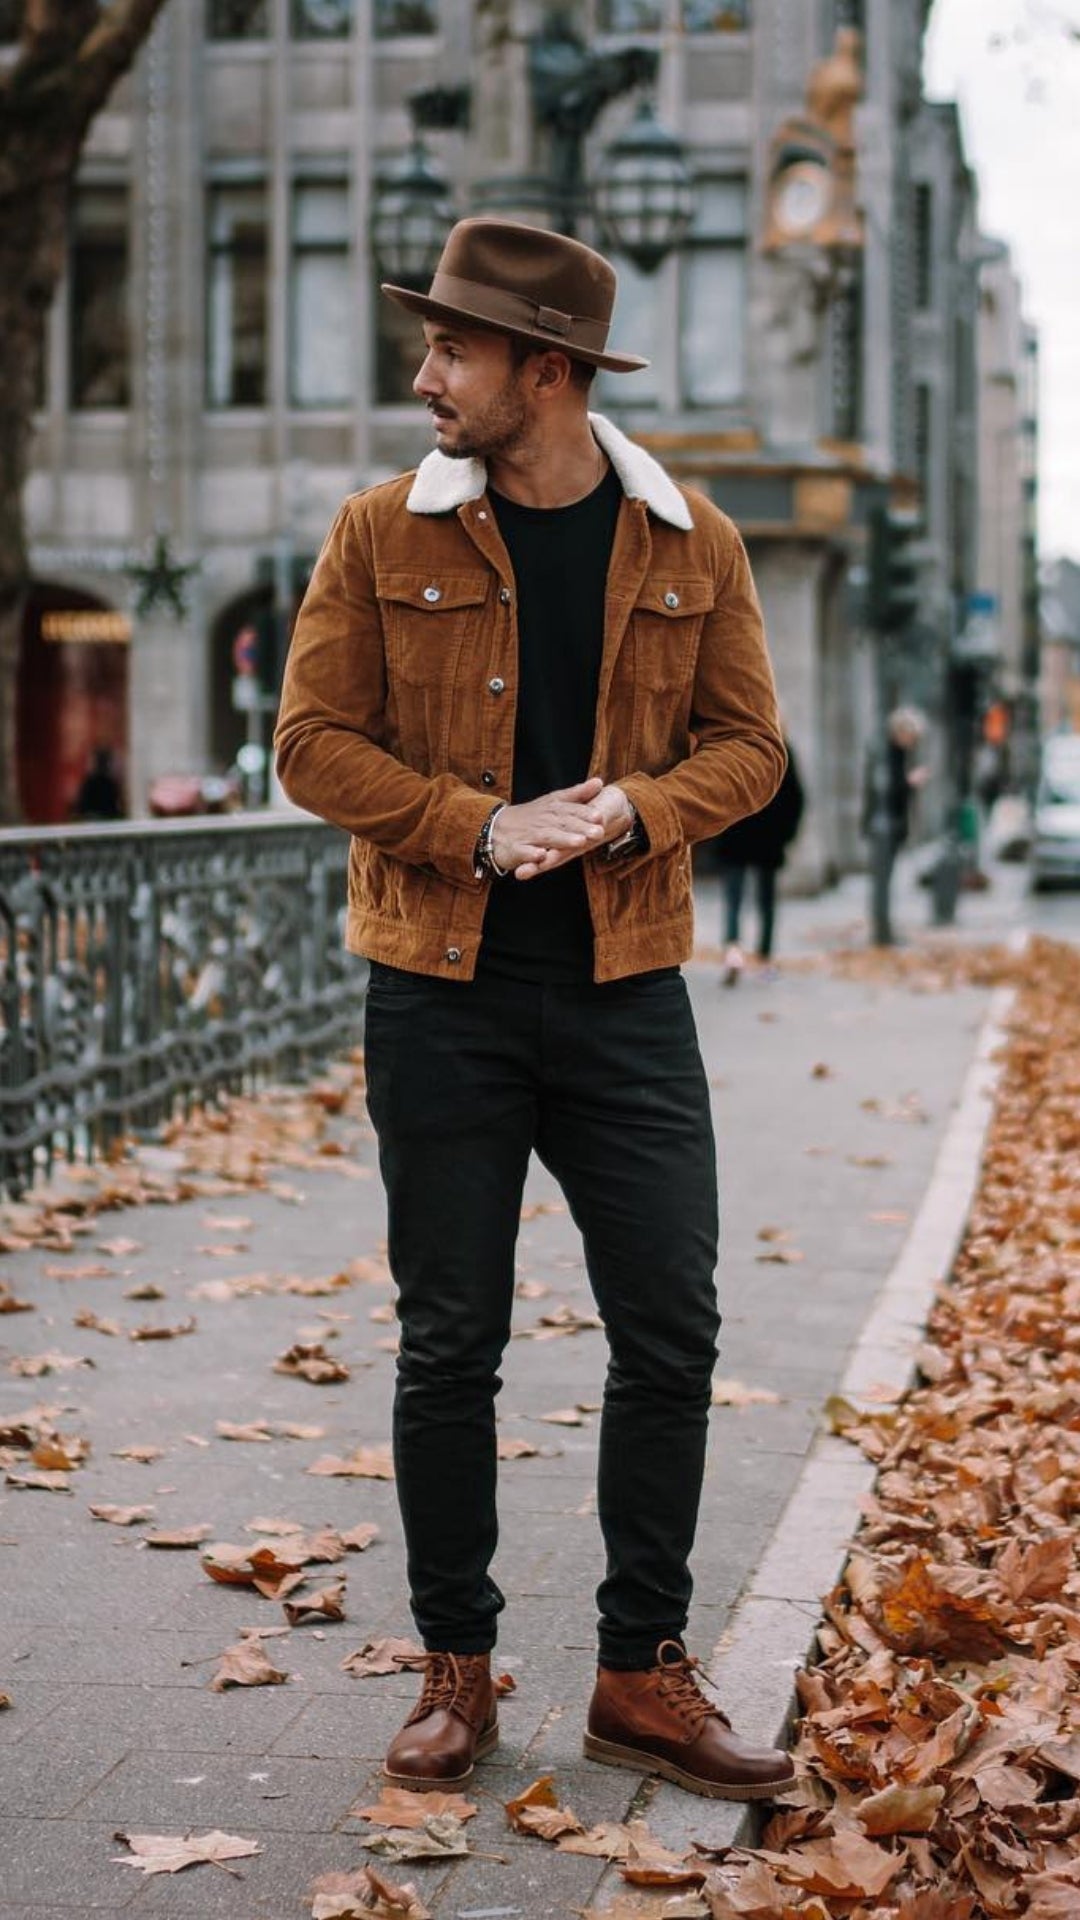 5 Best Looks From Sandro's Instagram Account #fallfashion #winter #outfits #mensfashion #streetstyle